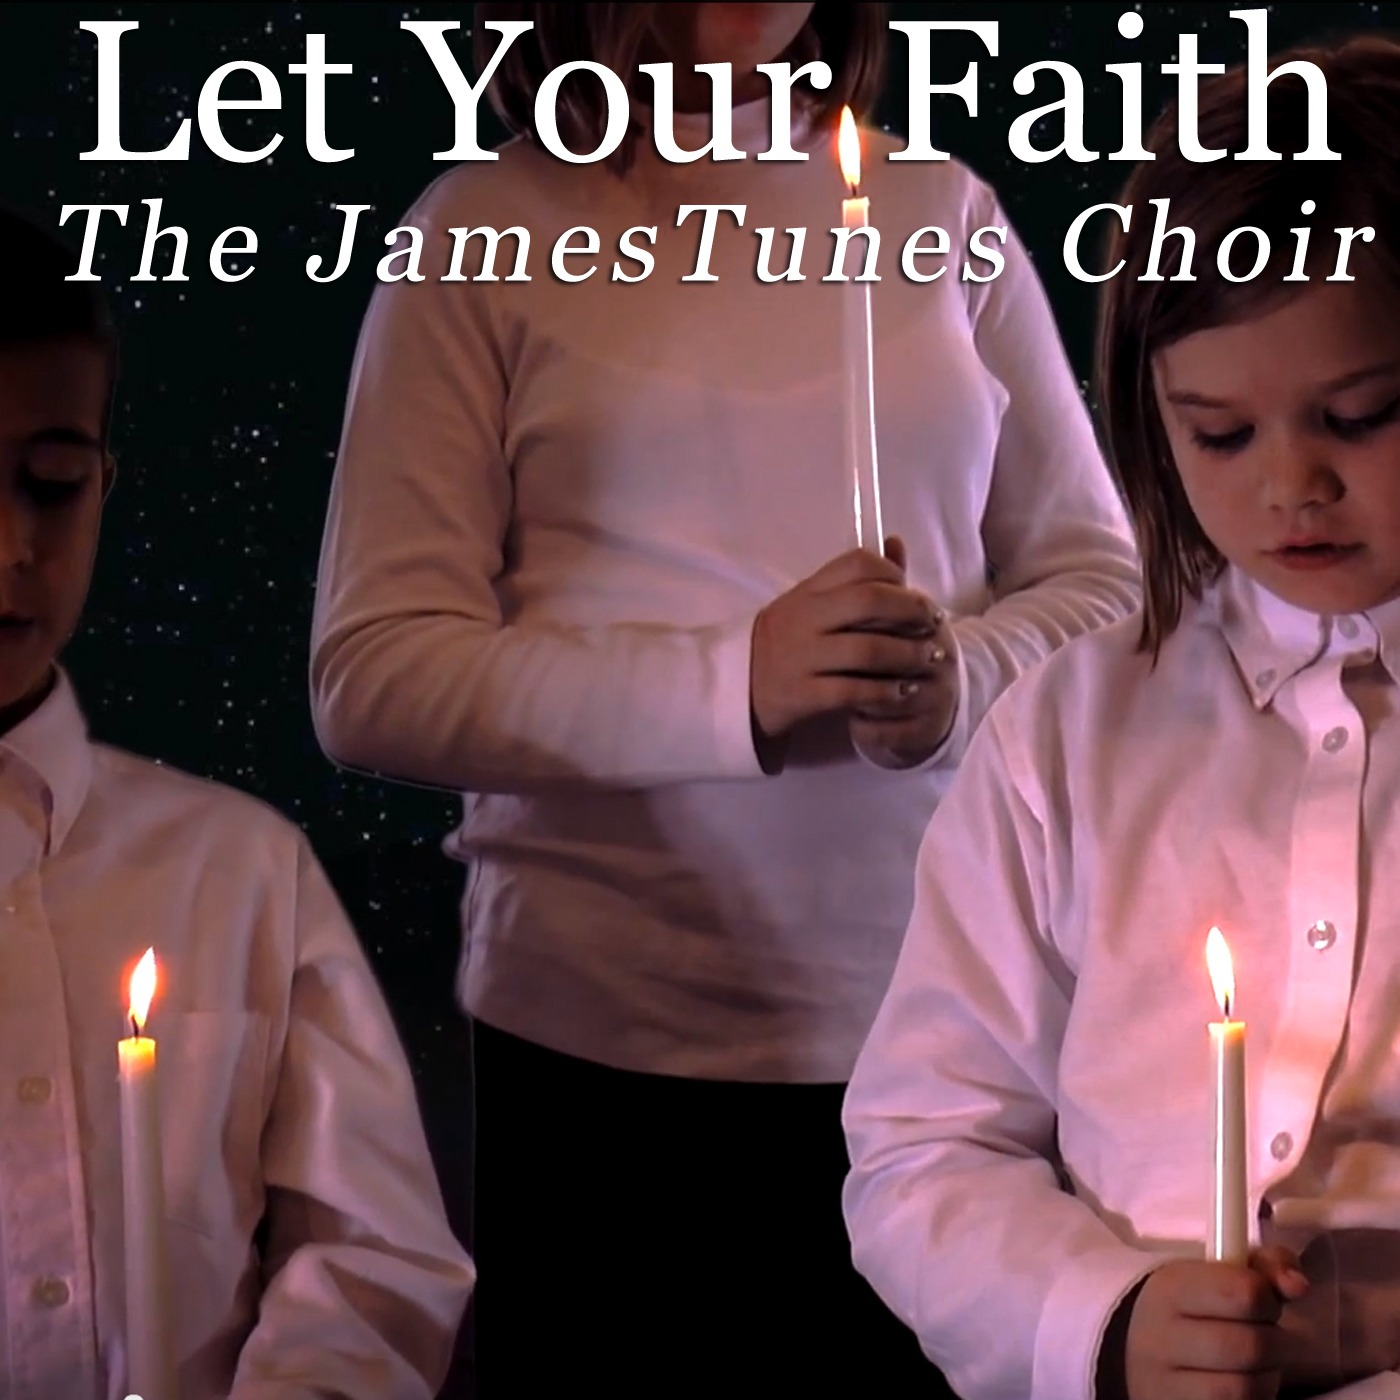 Music For Healing of Broken Souls: James McDowell introduces the JamesTunes Choir Interpreting A Song  That Sees Faith As A Guiding Light In Testing Times.